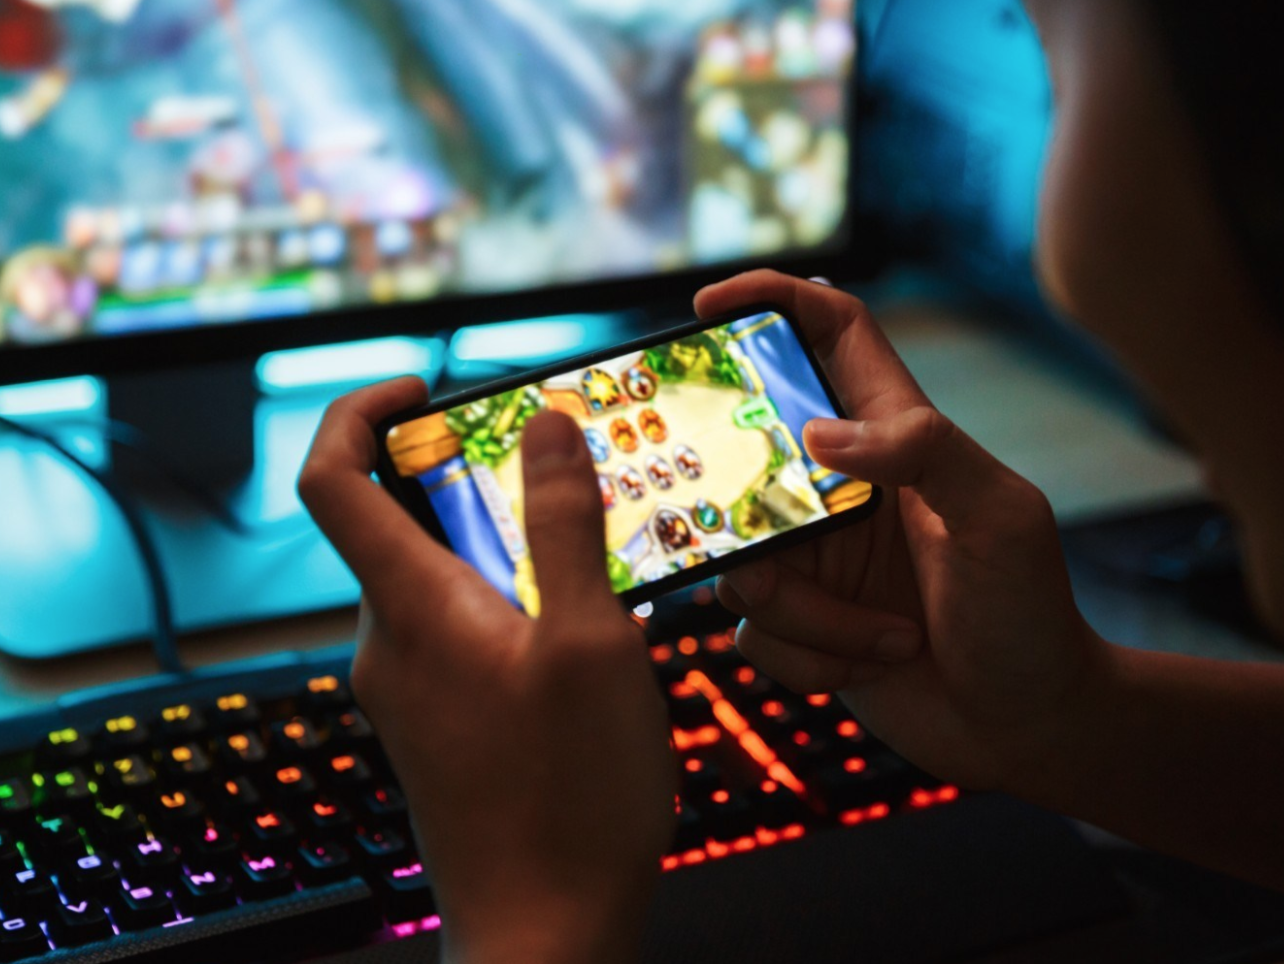 Difference in gaming experience for Mobiles & PC users